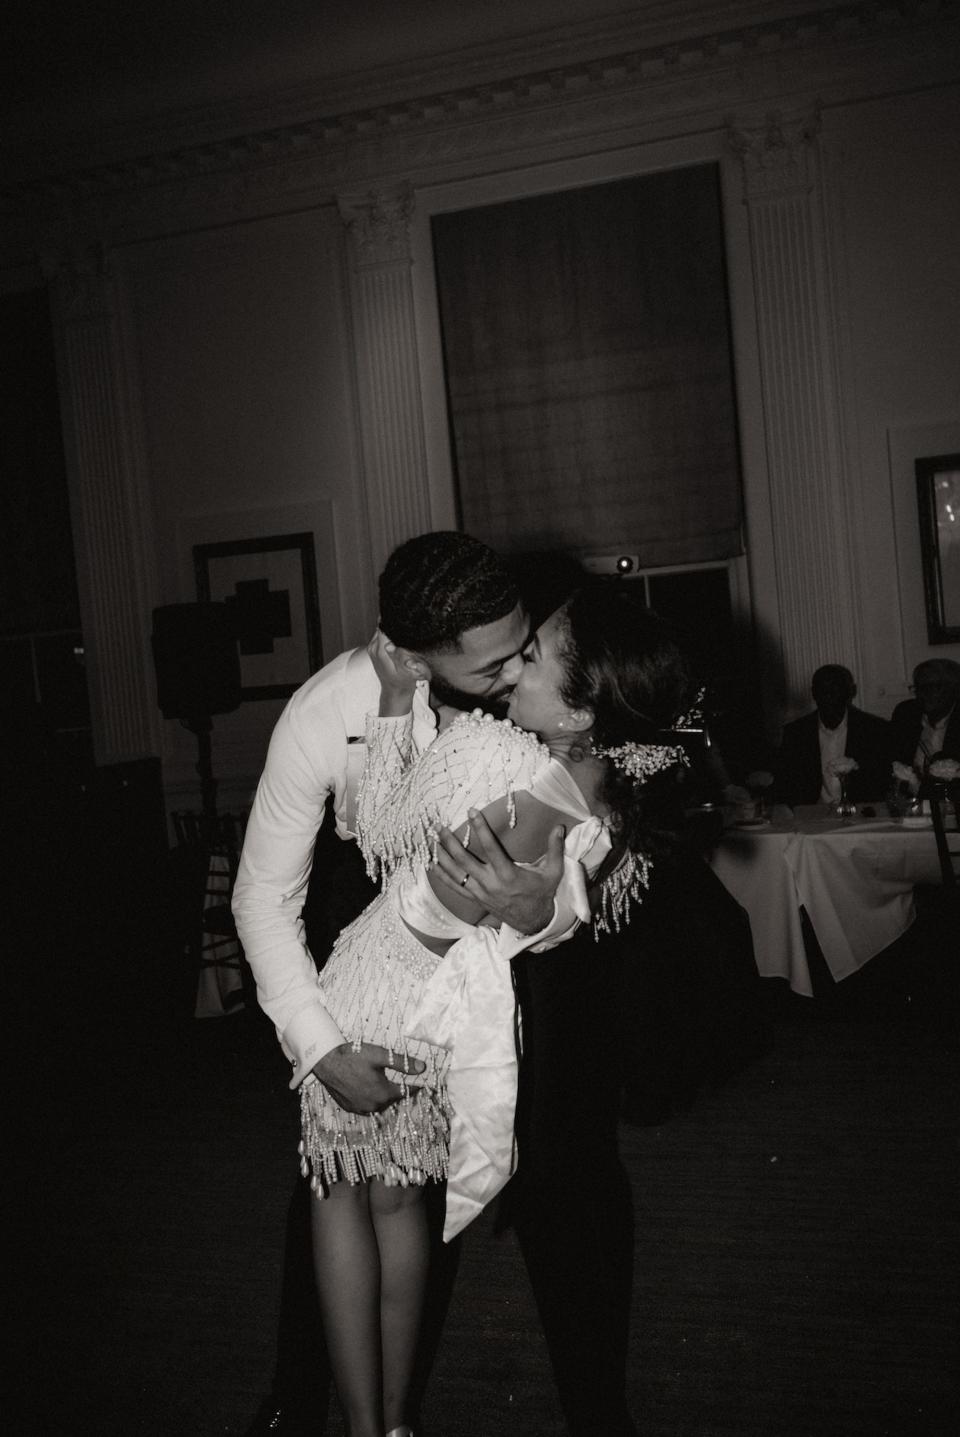 A black-and-white phot of a bride and groom kissing.